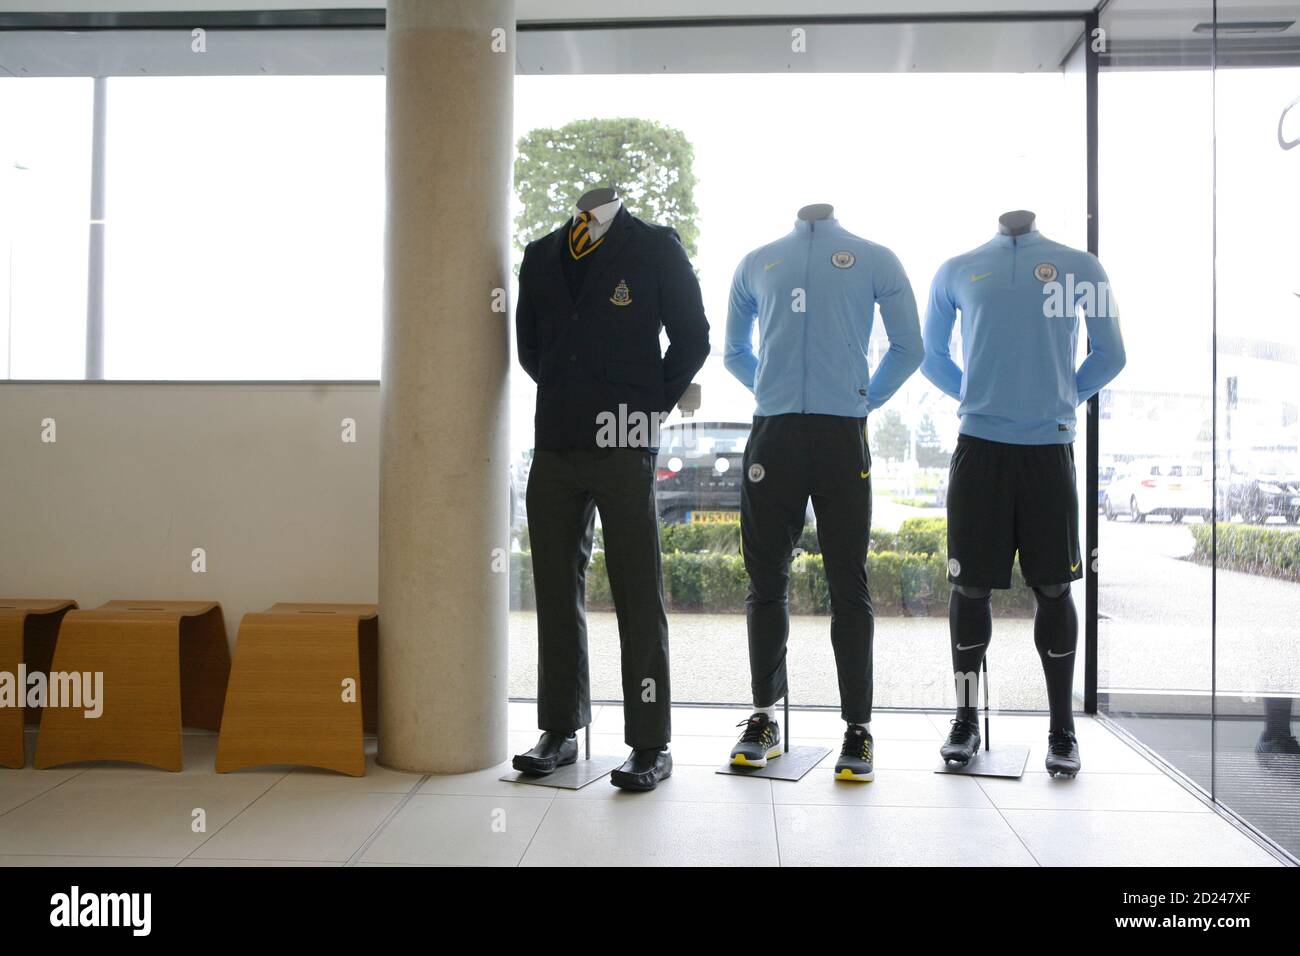 MCFC Academy  Academy Uniforms and standards of dress on display in the academy Foyer. Stock Photo